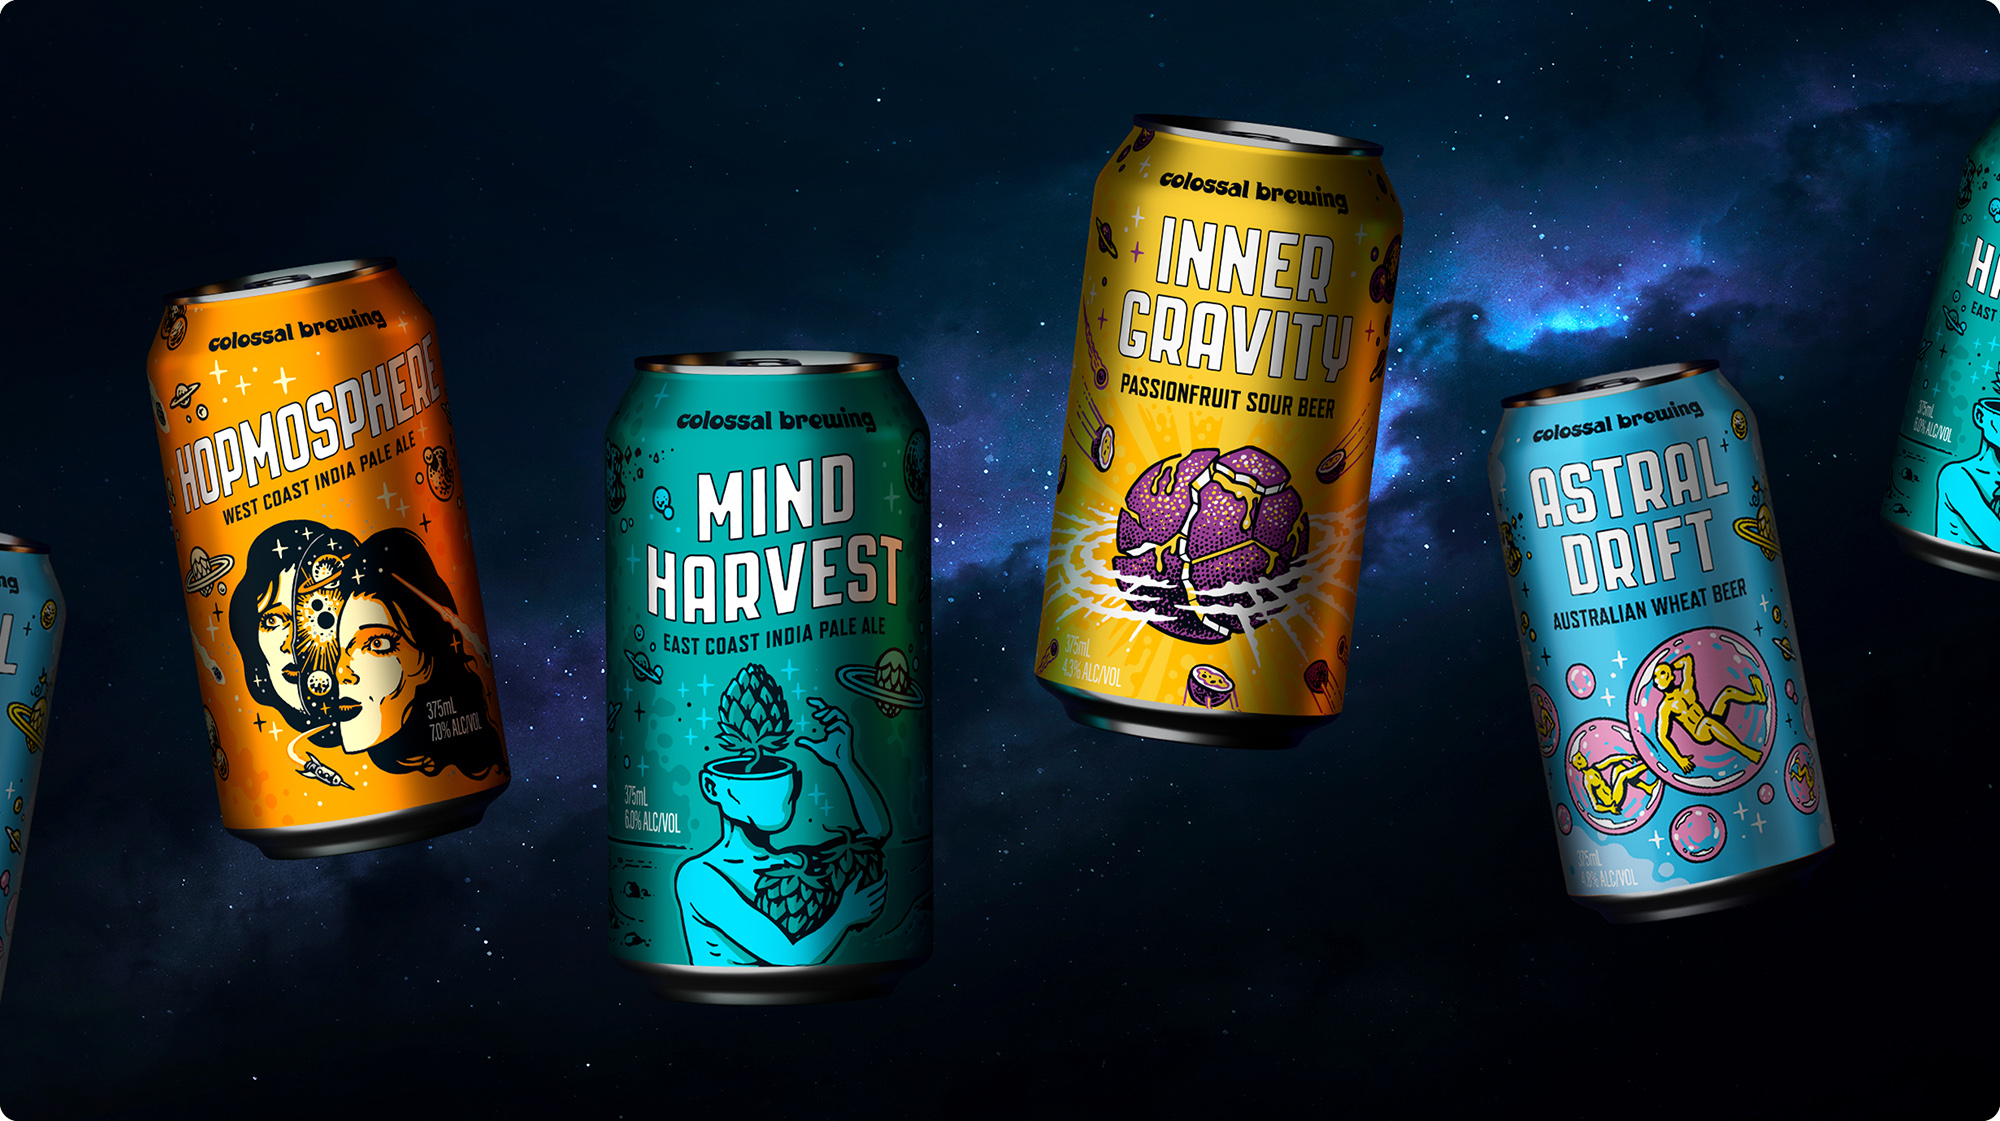 Colossal Brewing Brand and Packaging Design by Creative Platform